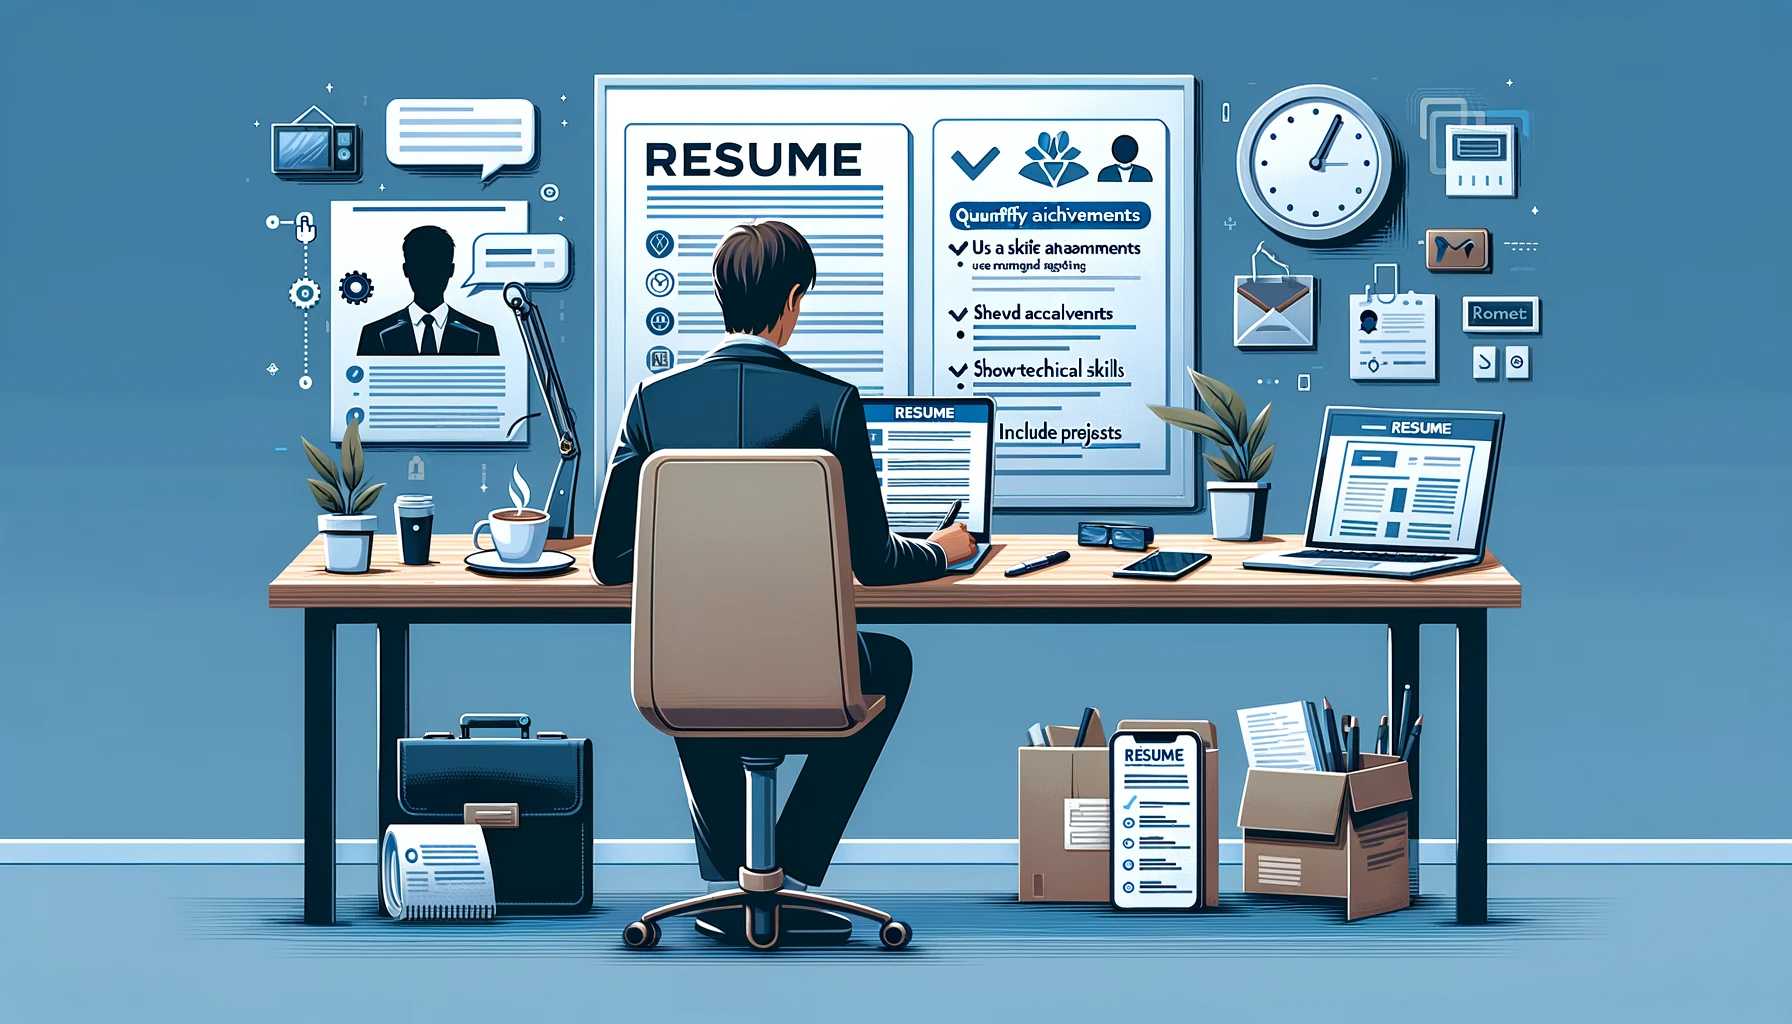 8 Tech Resume Tips to Stand Out and Get Hired